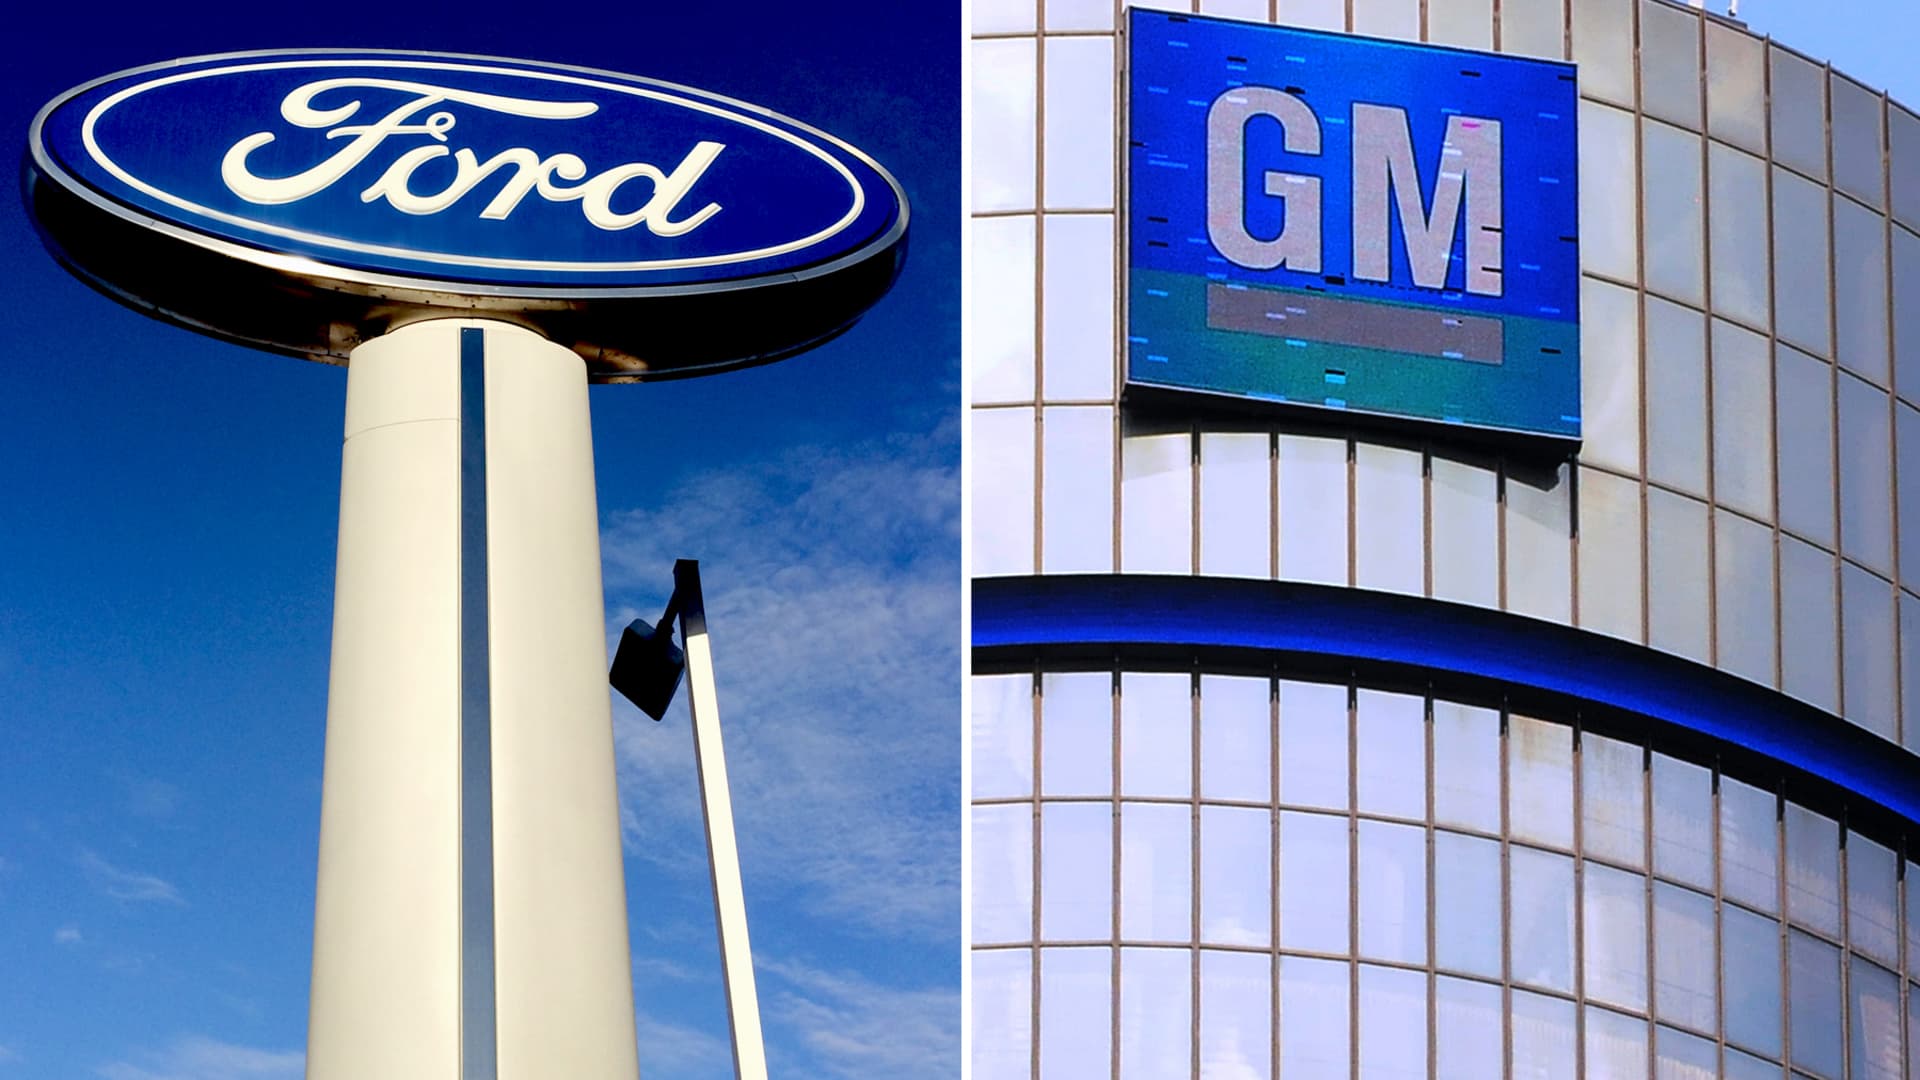 GM, Ford shares tumble after UBS downgrades cite weakening demand